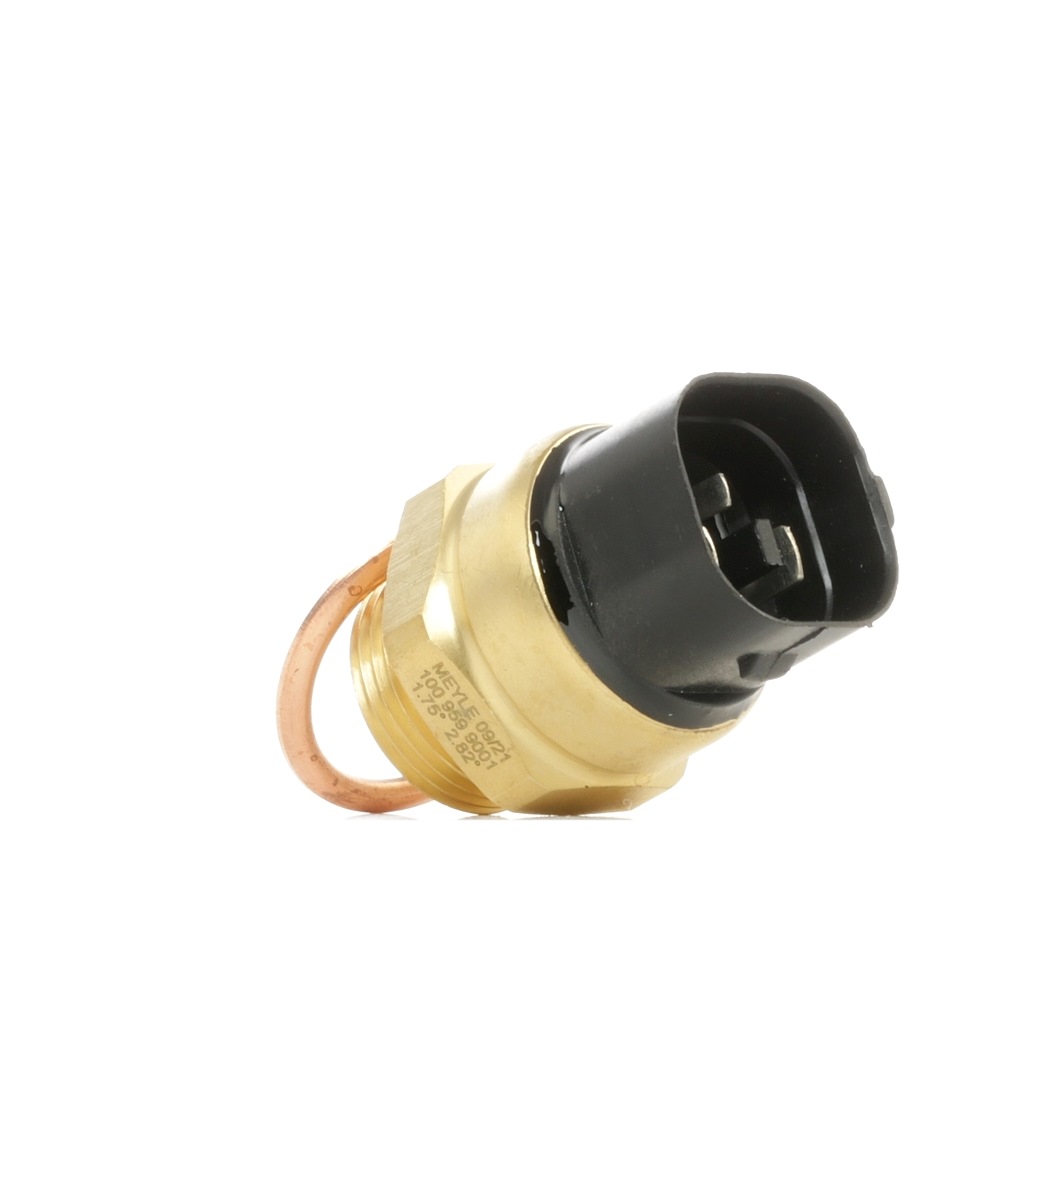 Radiator fan temperature switch MEYLE M22 x 1,5, with seal ring, ORIGINAL Quality - 100 959 9001